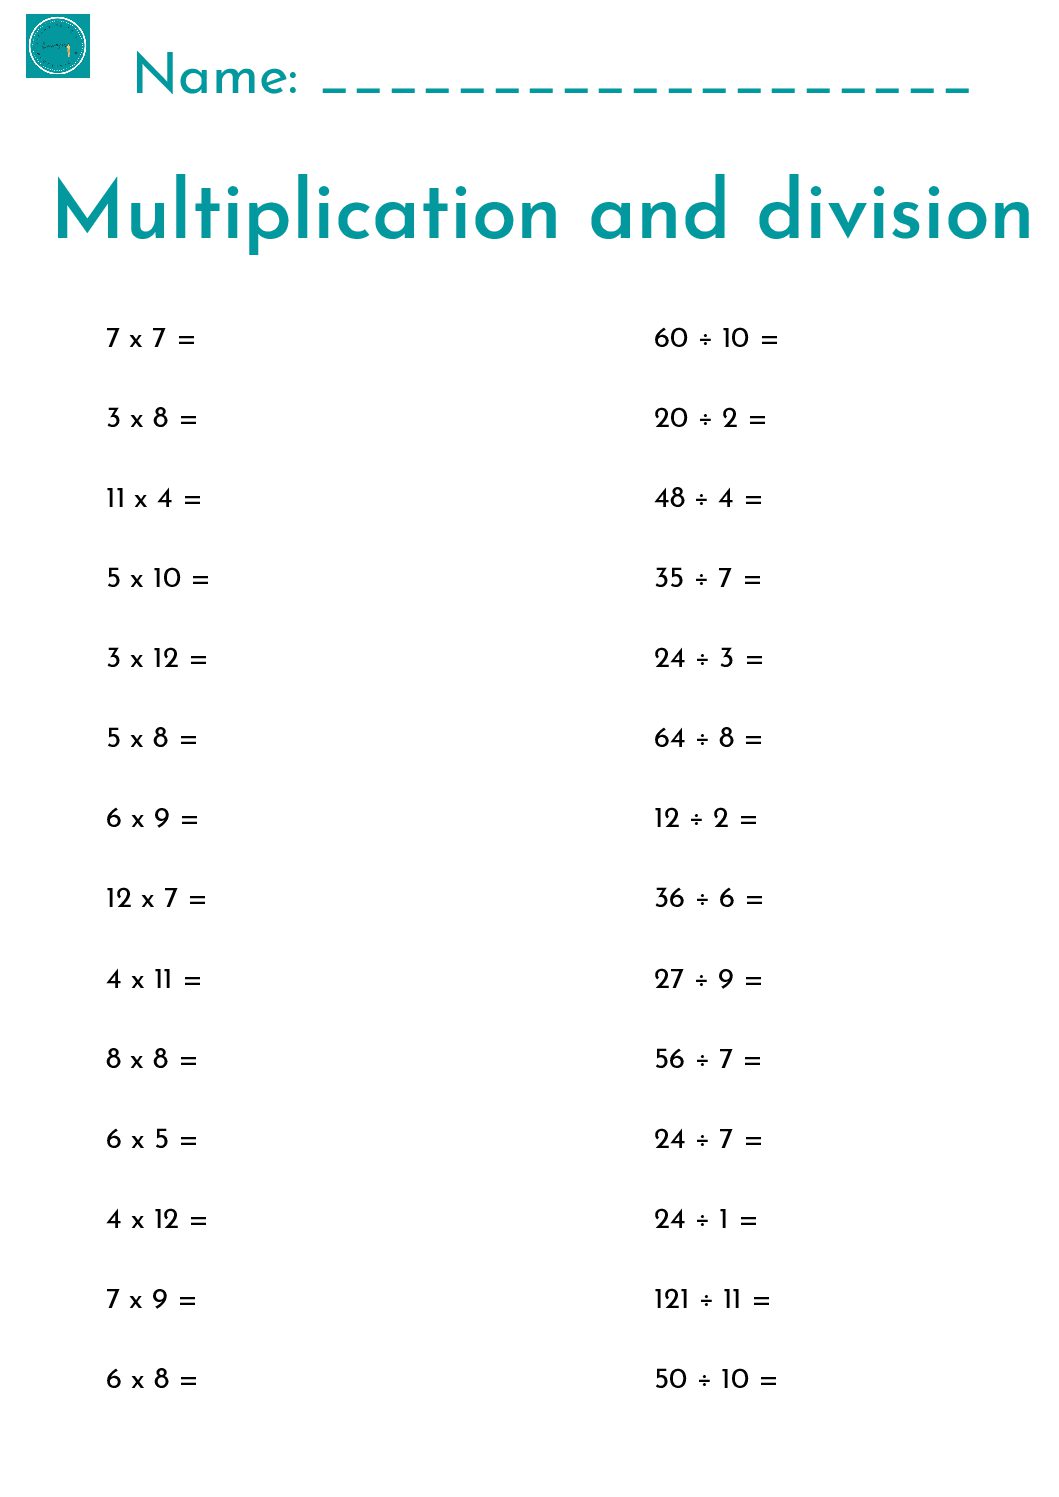 6 Times Tables Multiplication And Division Test Brokeasshome com